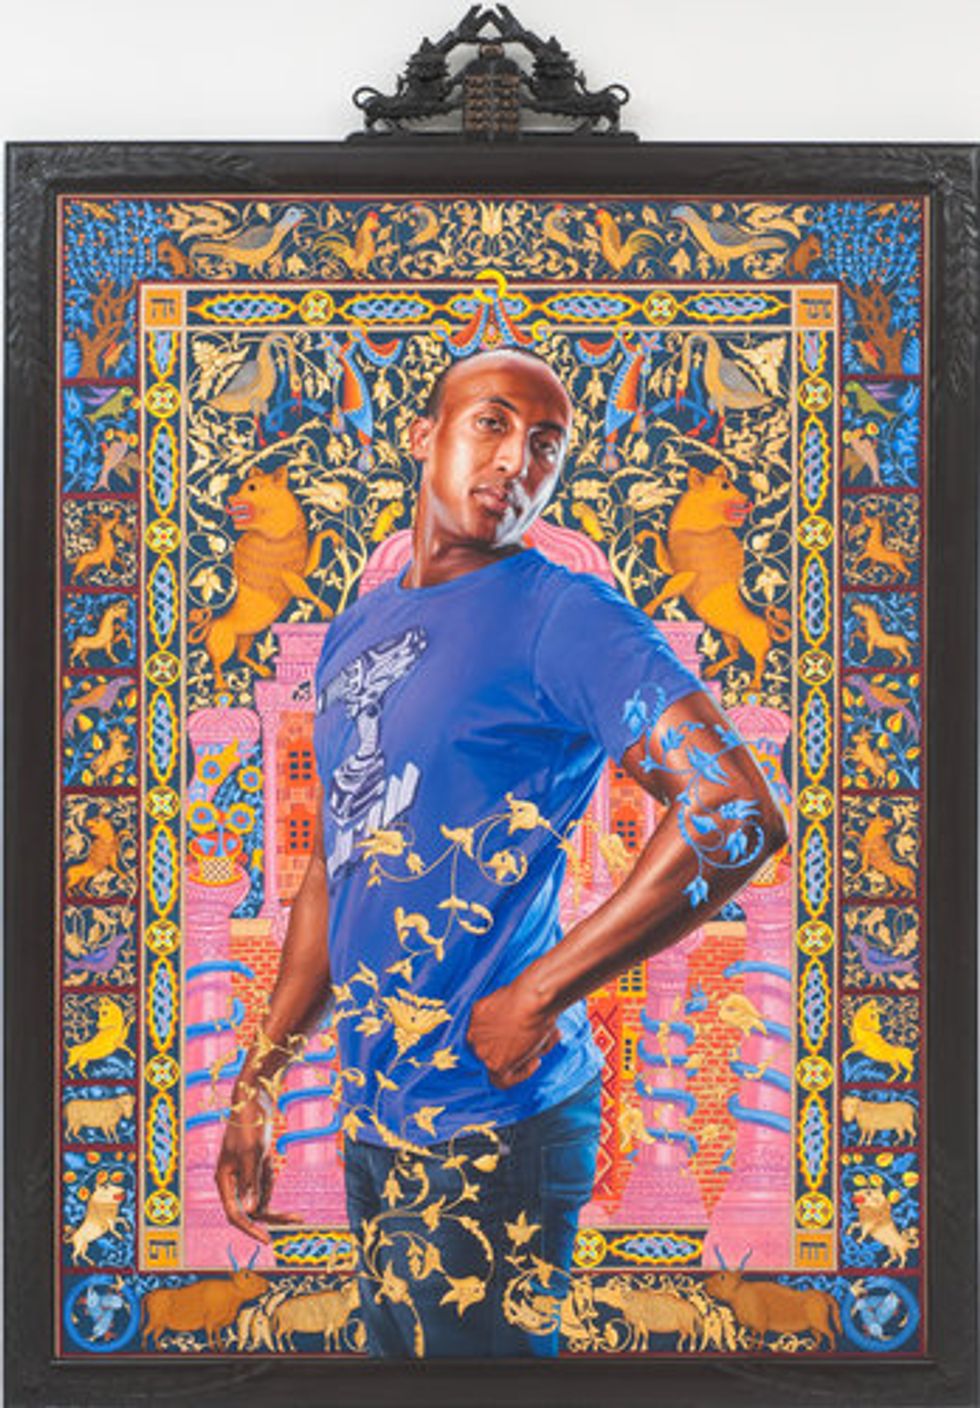 NYC: Kehinde Wiley Exhibition at the Jewish Museum